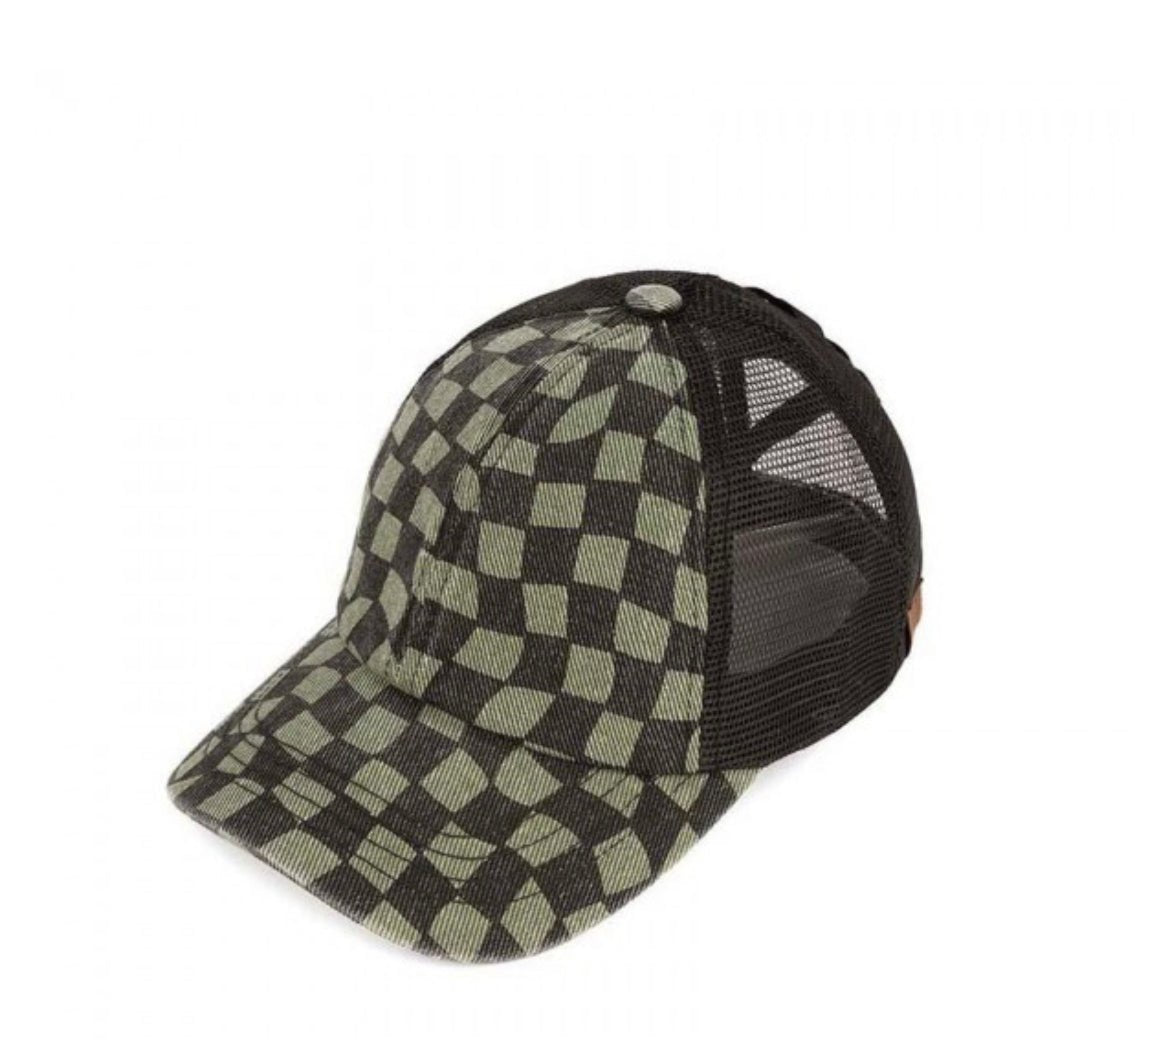 Checkered Criss Cross Pony Cap with Mesh Back